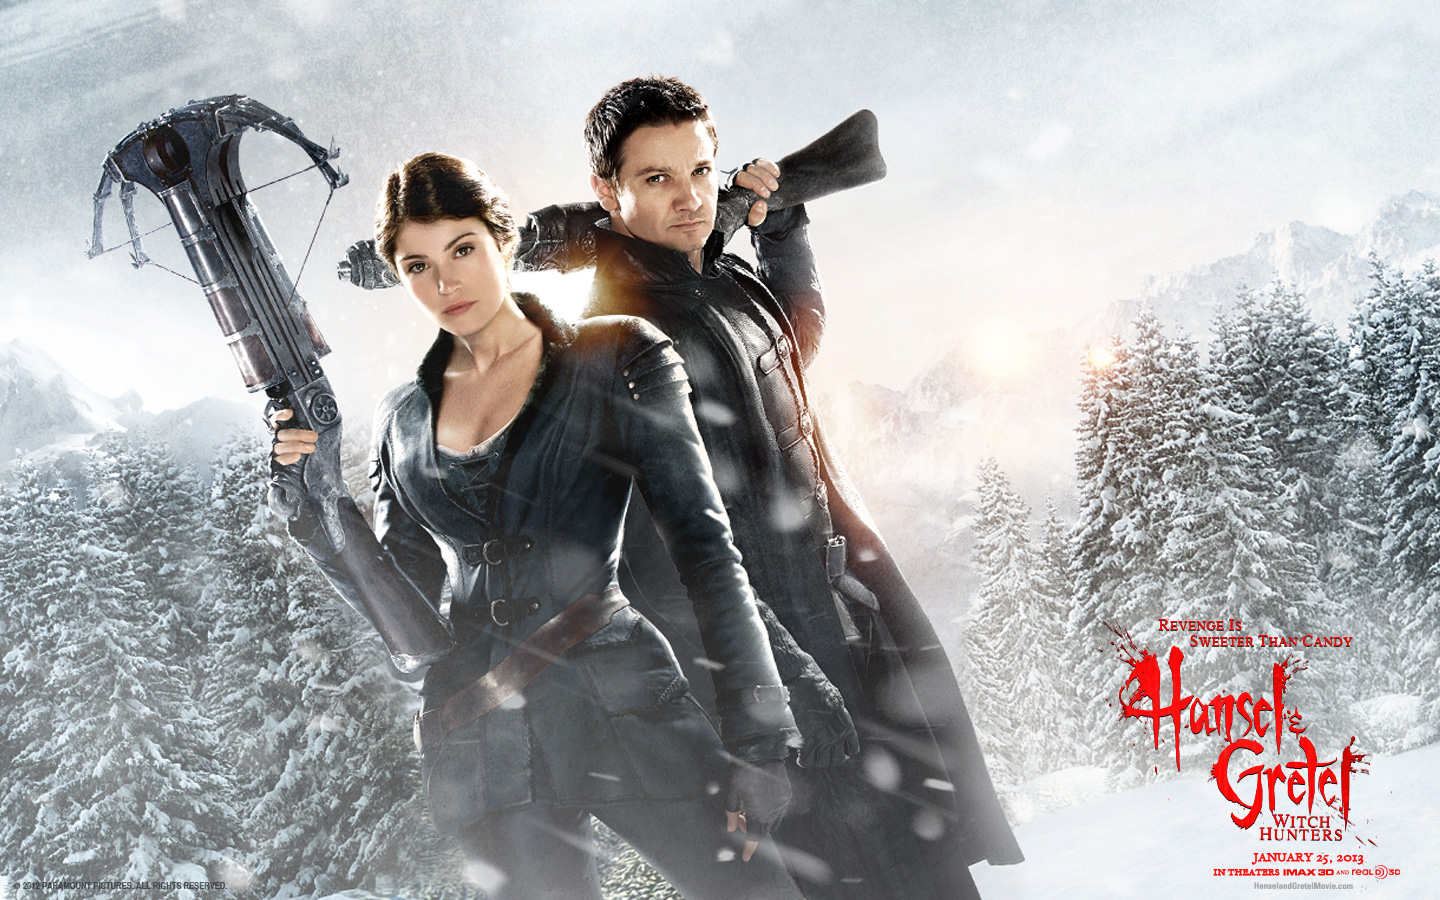 Download HQ Hansel and Gretel Witch Hunters wallpaper / Movies / 1440x900